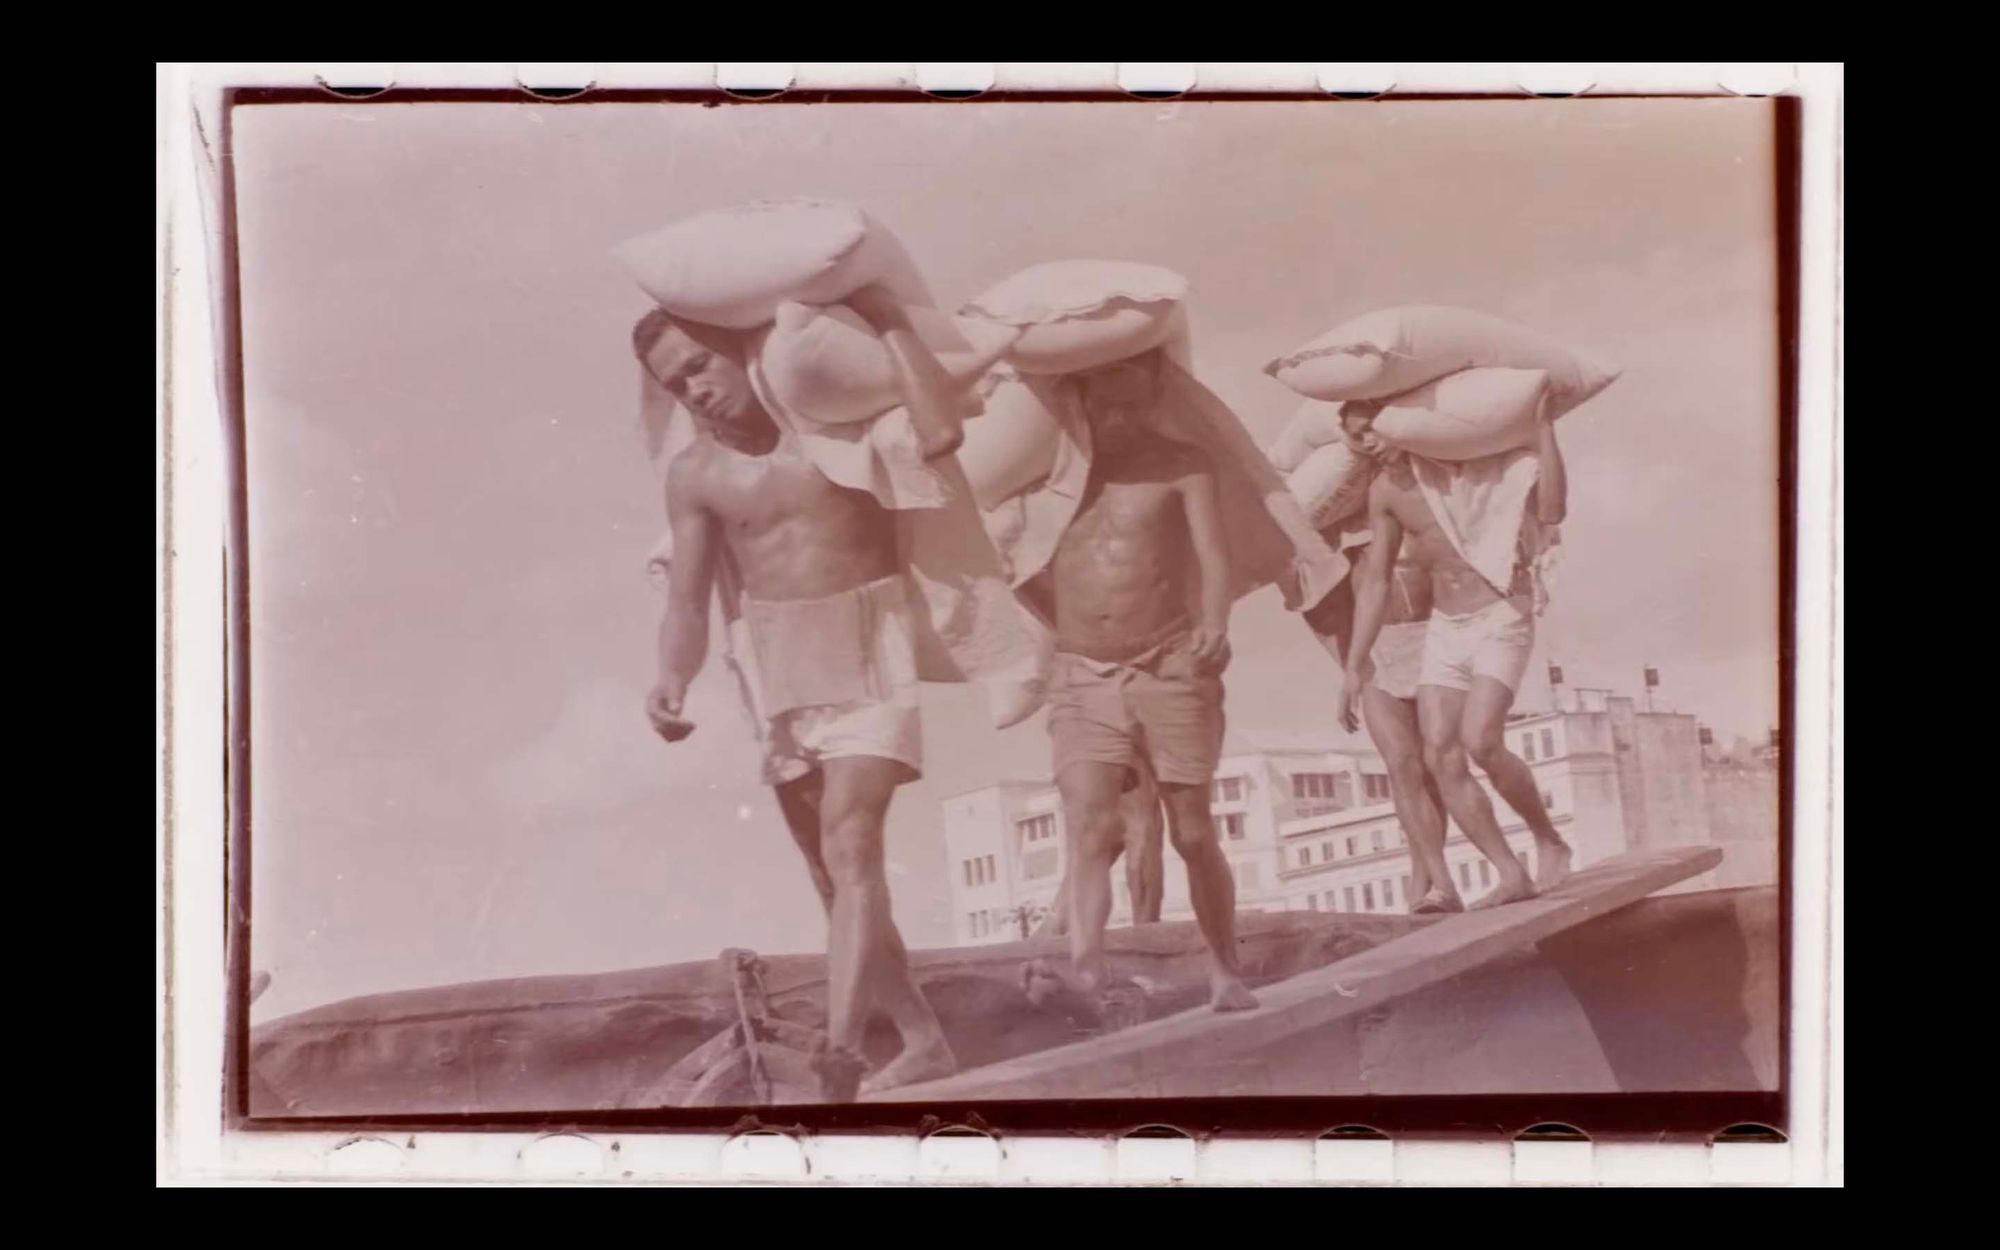 A sepia-toned photograph of three steverdores carrying sacks of rice. The sacks have soft, firm shapes and they rest on top and to the side of the stevedores' heads. The steverdores are shirtless and are wearing shorts.